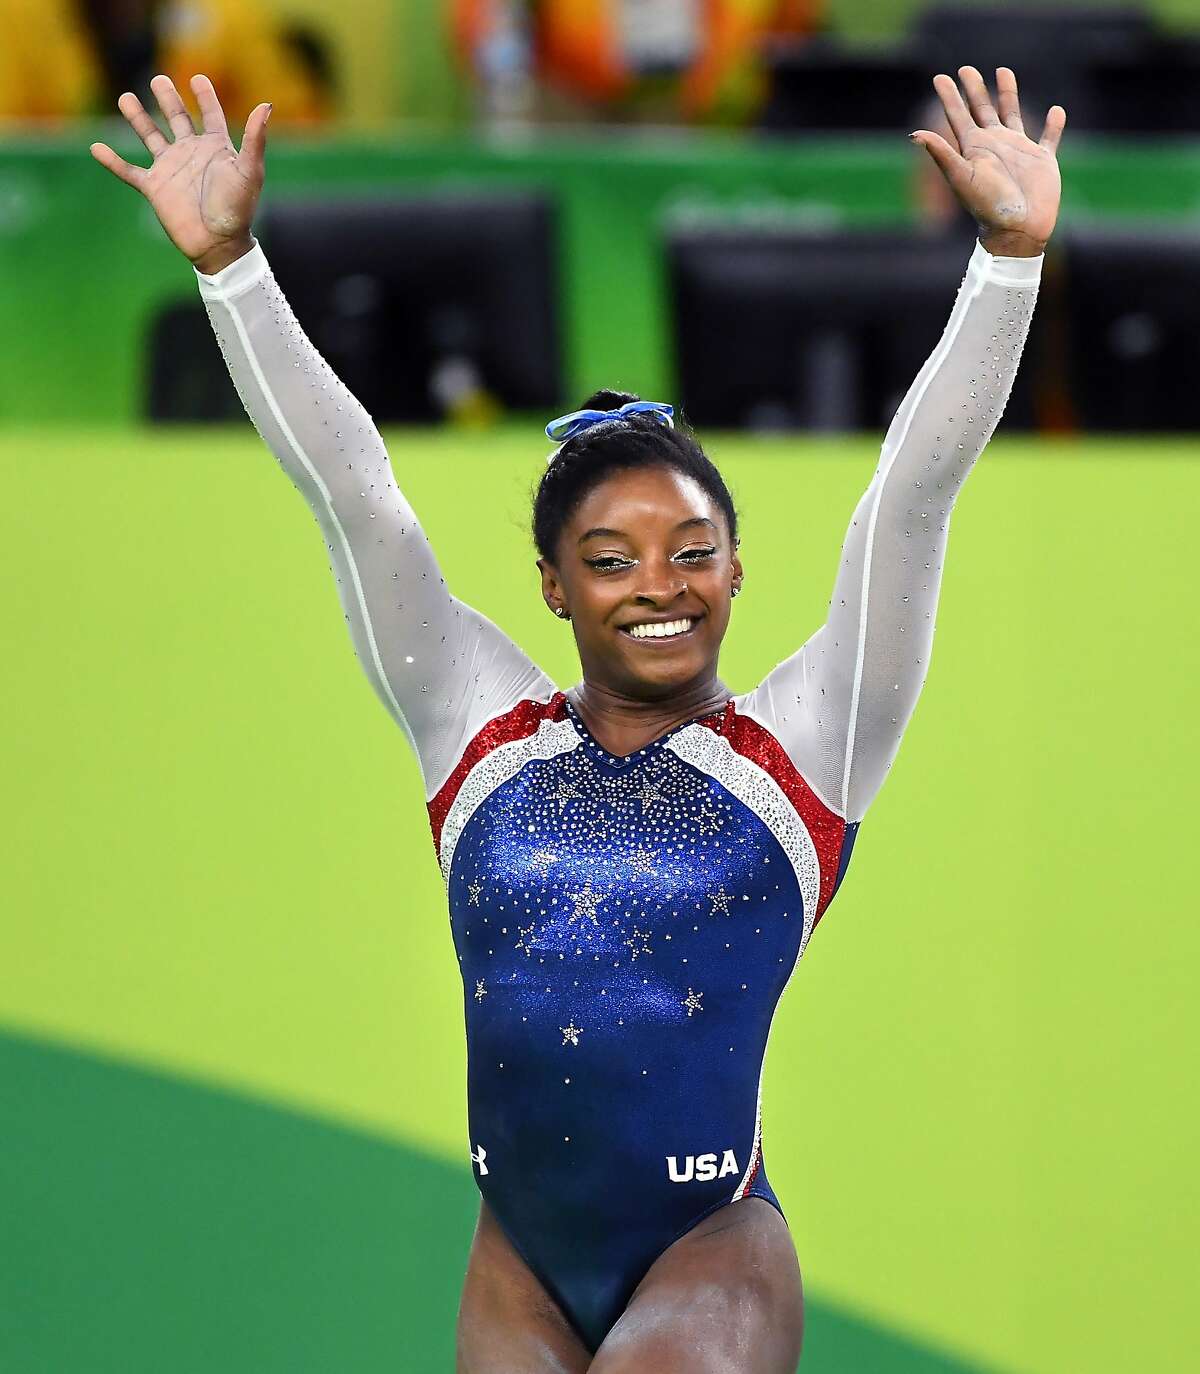 U.S. gymnast Simone Biles celebrates her gold medal in the women's All-Around Individual at the Summer Olympics in Rio de Janeiro, Brazil, on Thursday, Aug. 11, 2016. (Wally Skalij/Los Angeles Times/TNS)